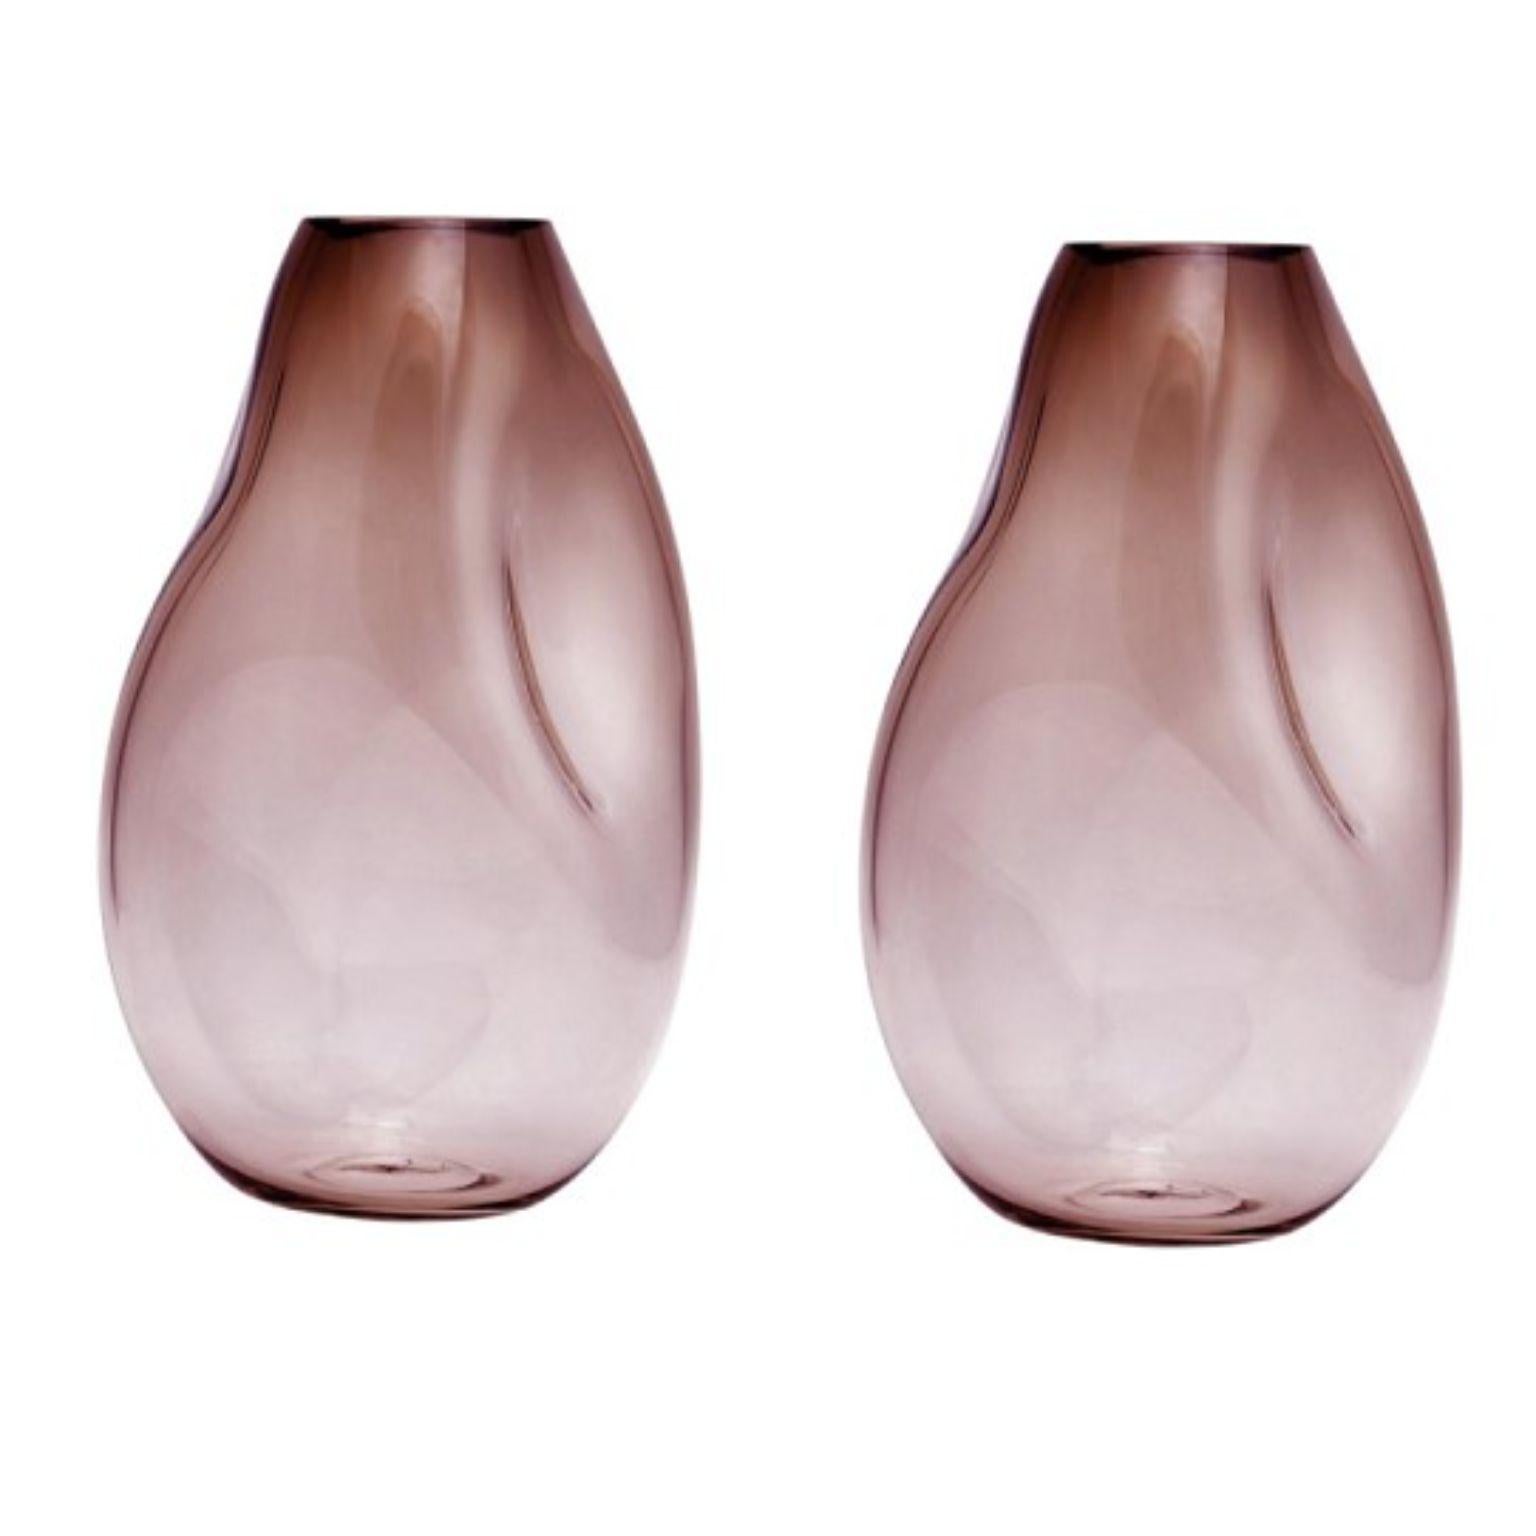 Set of 2 supernova IV silver smoke red L vases by ELOA
No UL listed 
Material: glass
Dimensions: D 15 x W 17 x H 41 cm
Also available in different colours and dimensions.

SUPERNOVA is a collection of vases and bowls that, though they don‘t